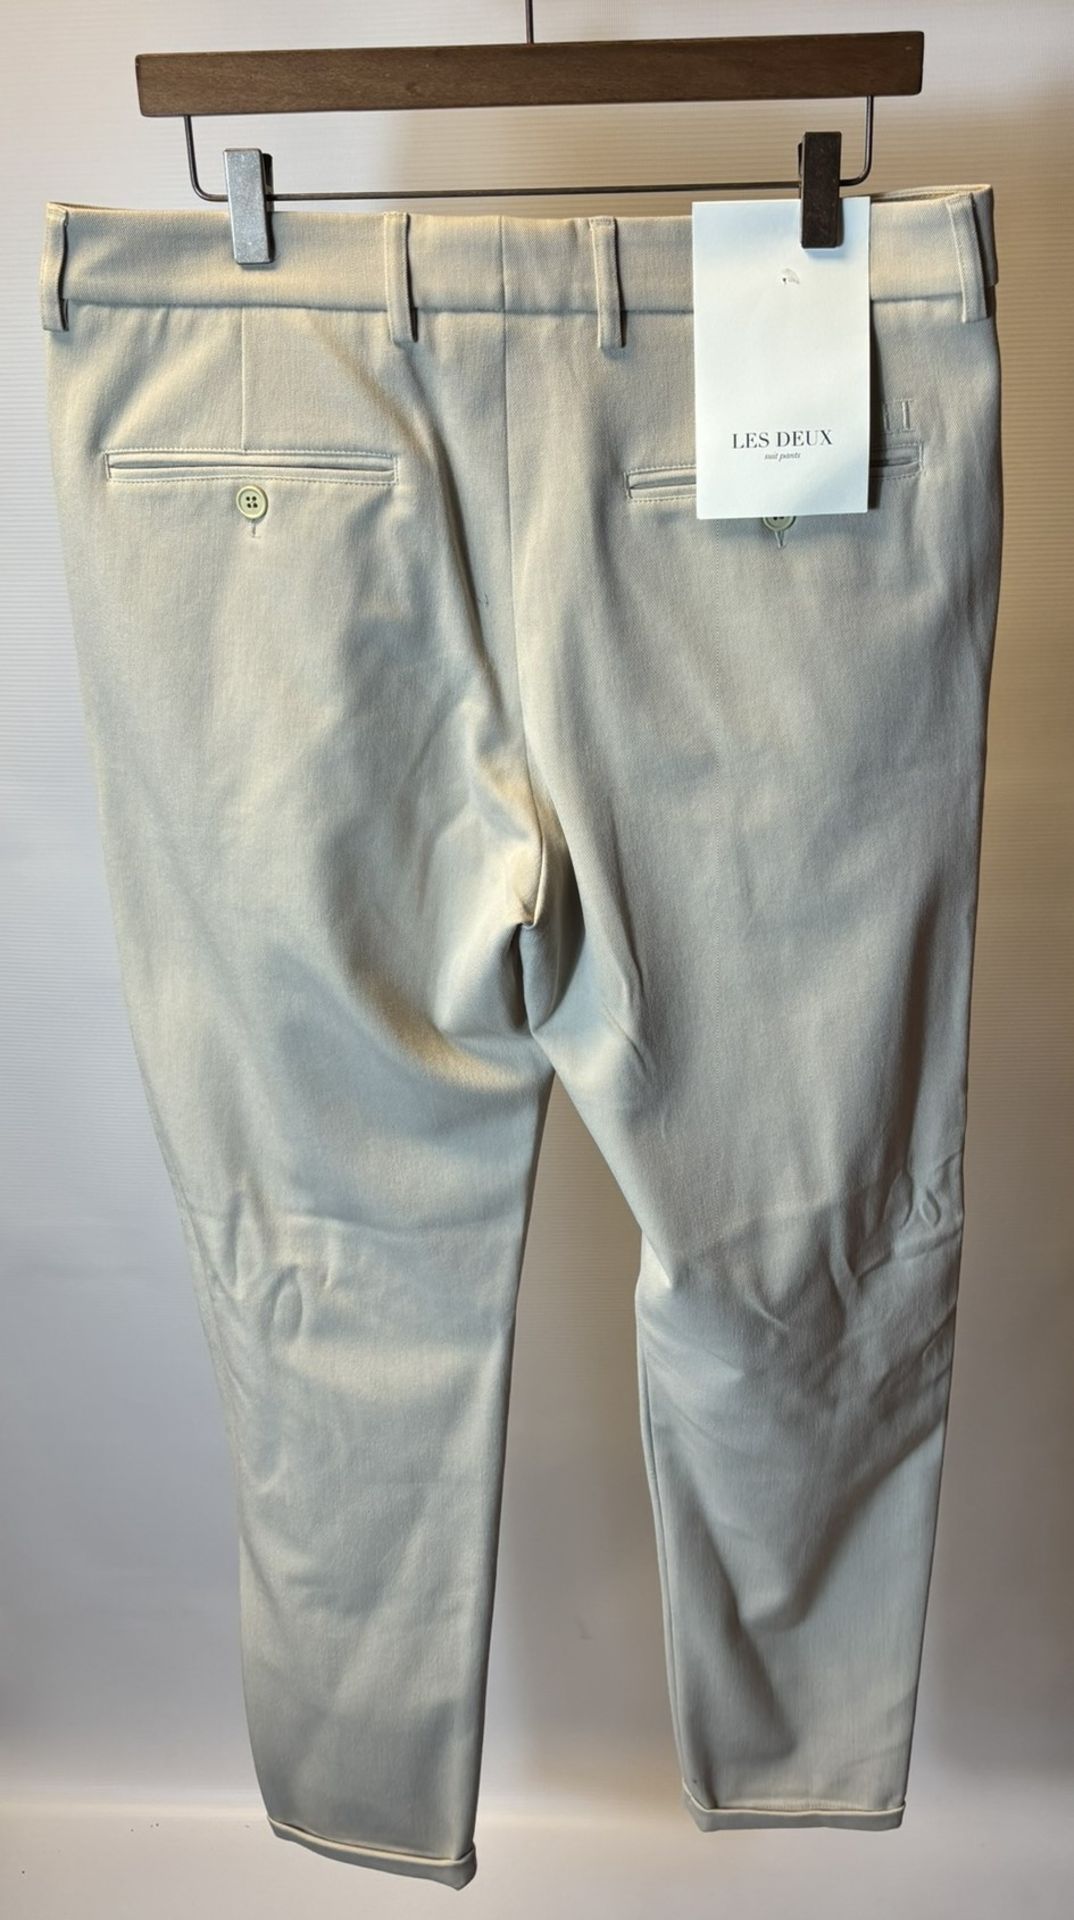 15 x Various Pairs Of Women's Trousers As Seen In Photos - Image 35 of 45